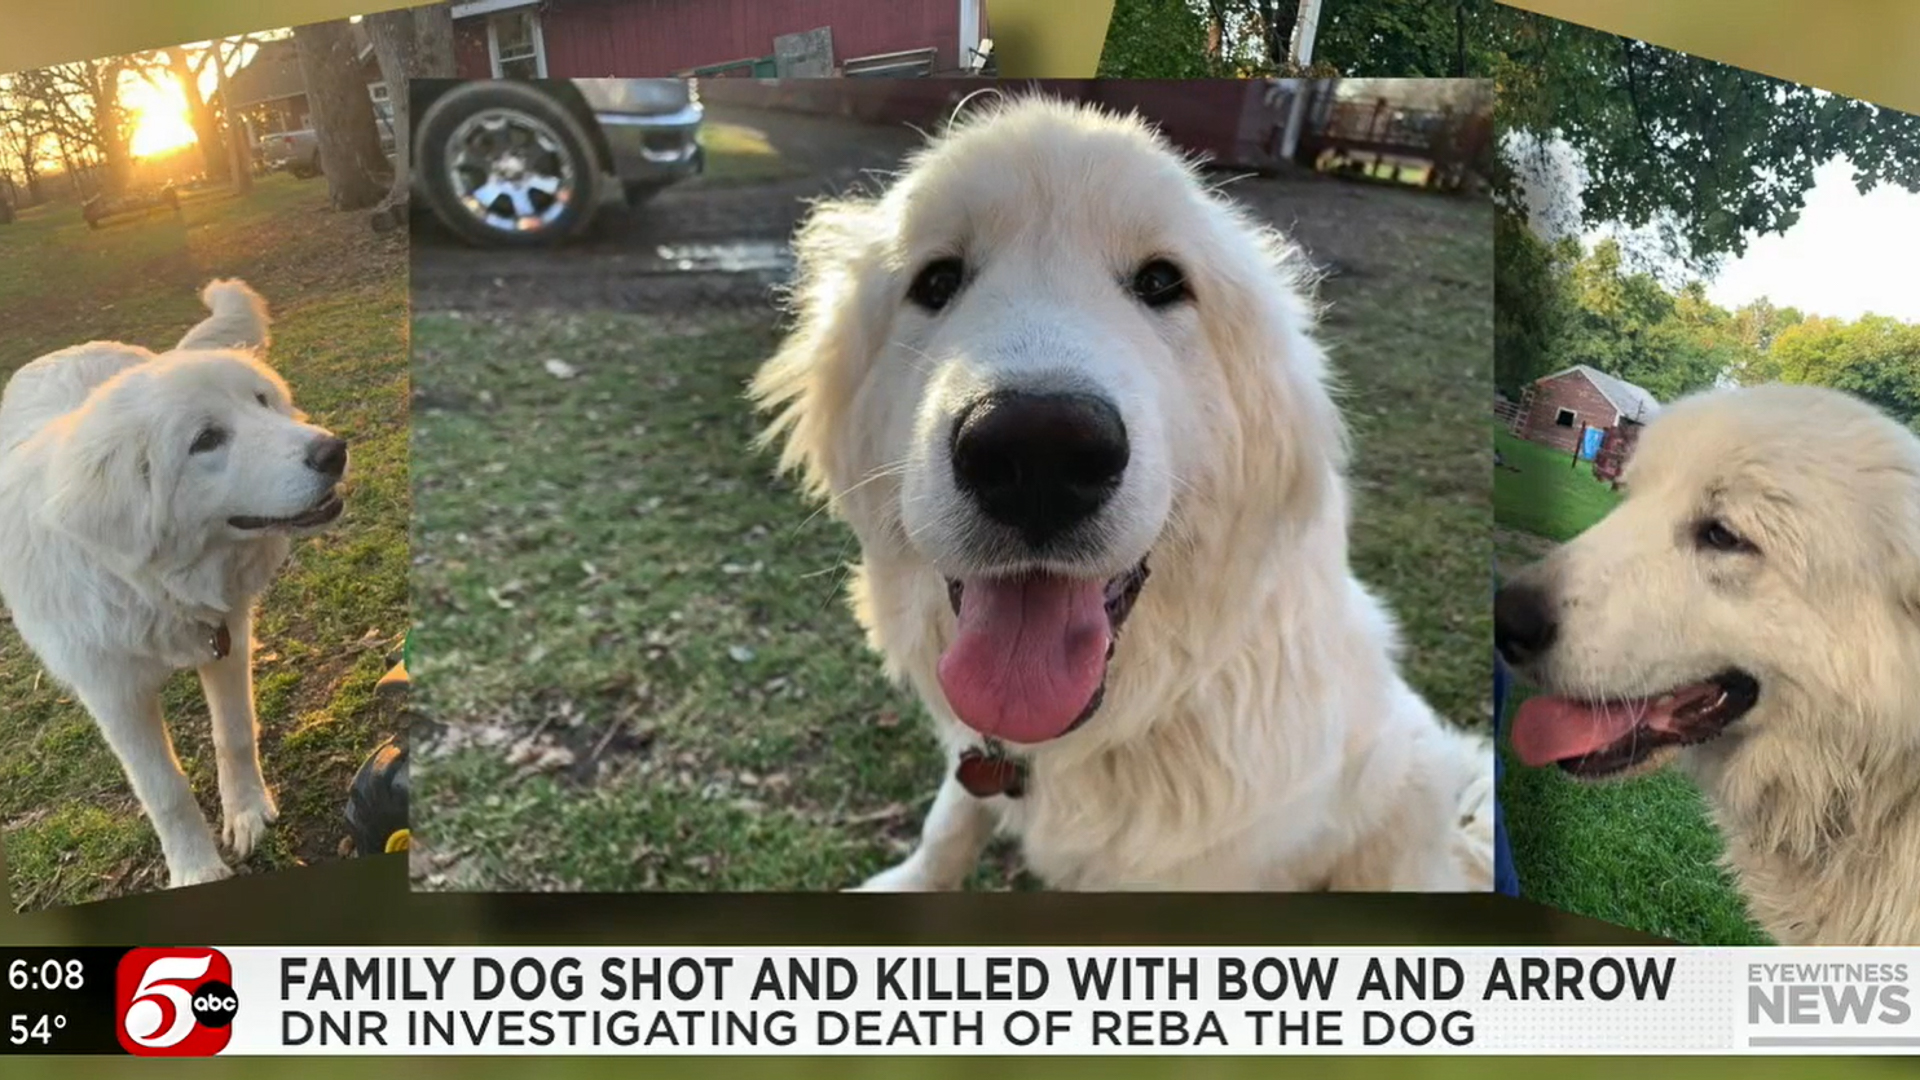 Family Dog Killed With Bow